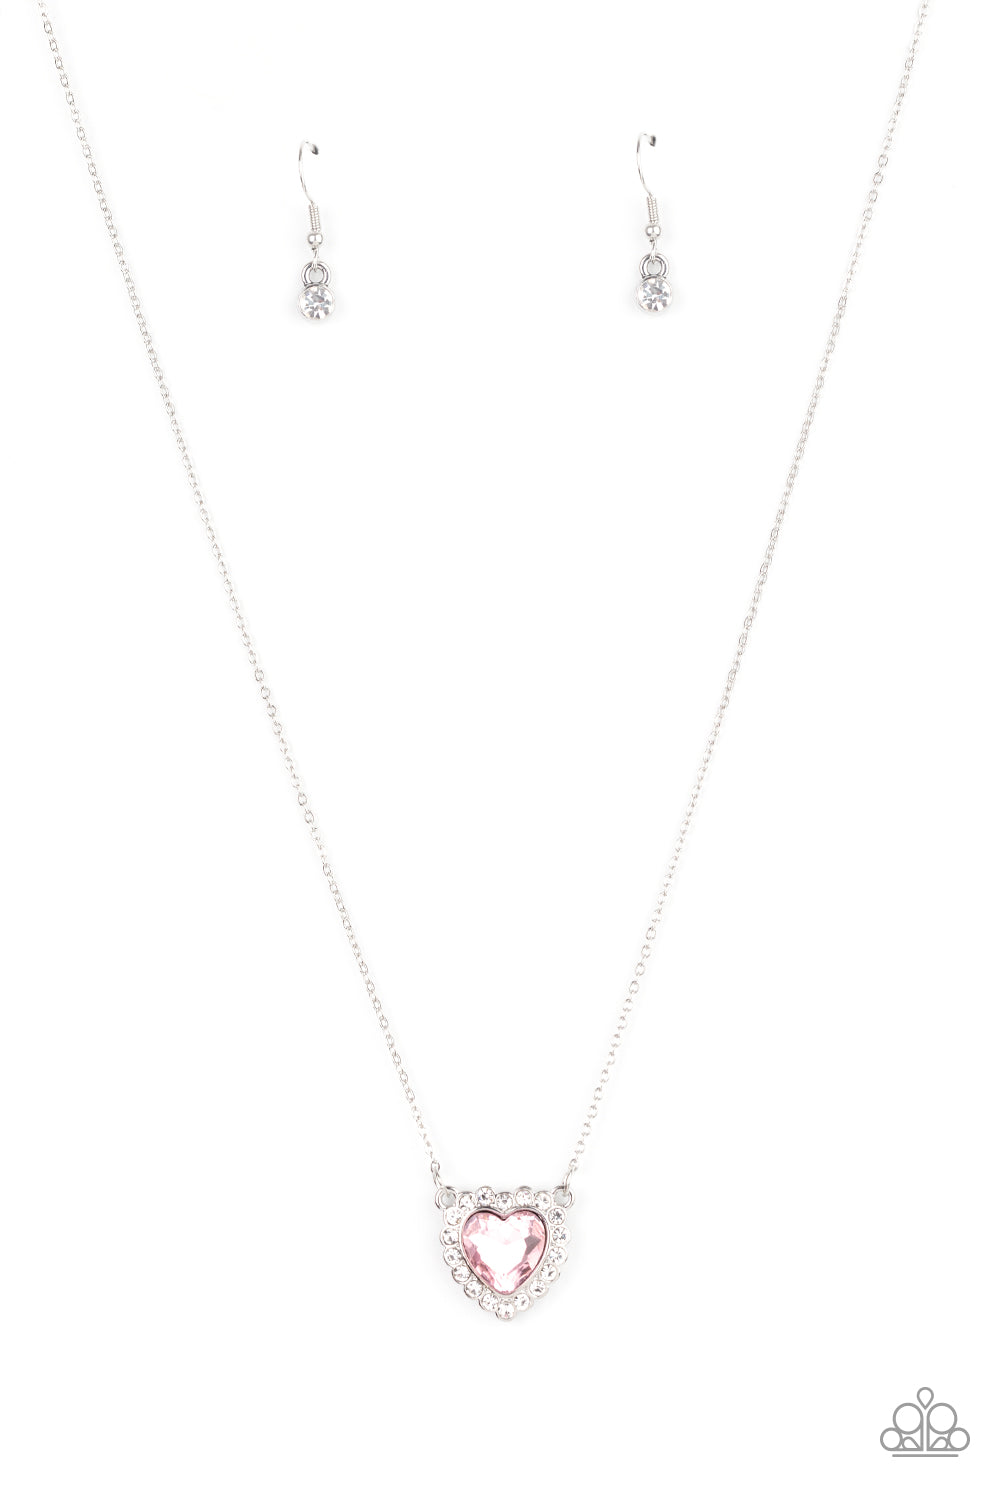 Out of the GLITTERY-ness of Your Heart - Pink necklace 1798